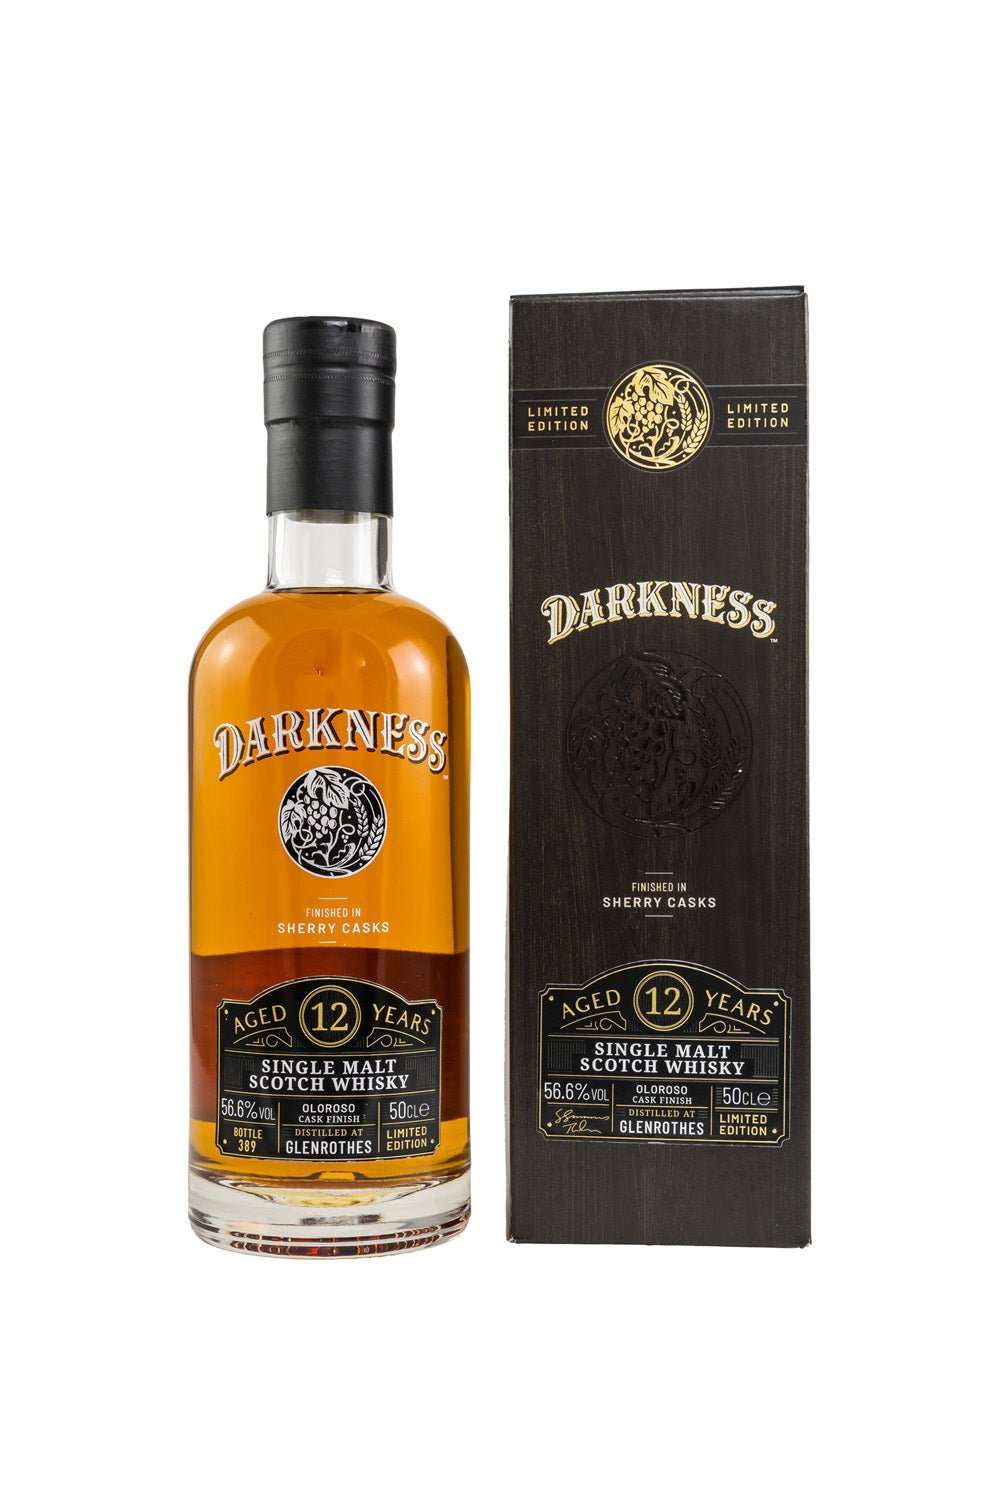 Glenrothes 12 Jahre Darkness Oloroso Sherry Cask Finish 56,6% vol. 500ml - Maltimore